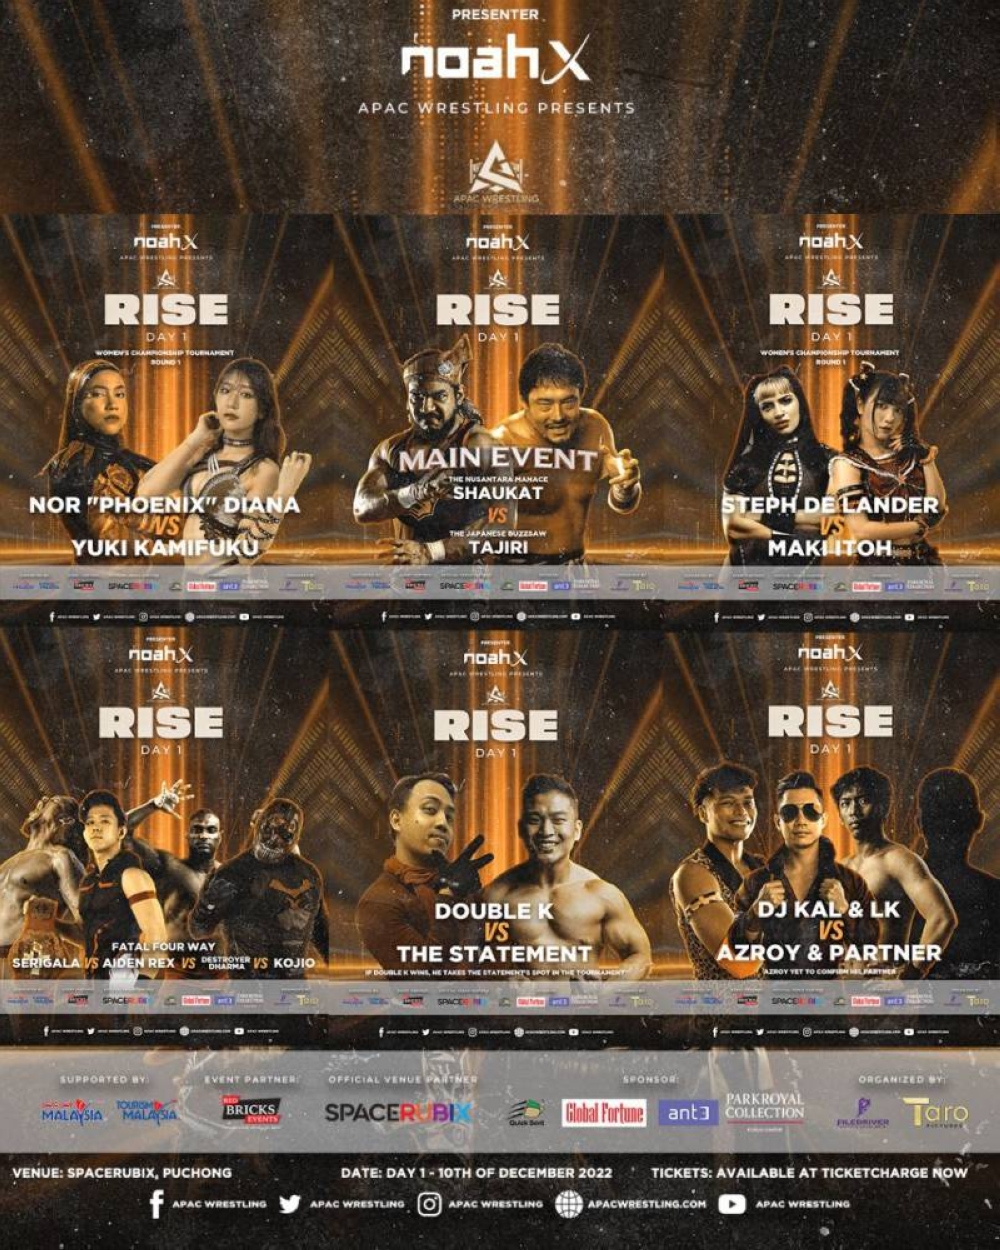 The match cards for day one of the Apac Wrestling Rise event. — Picture courtesy of Apac Wrestling